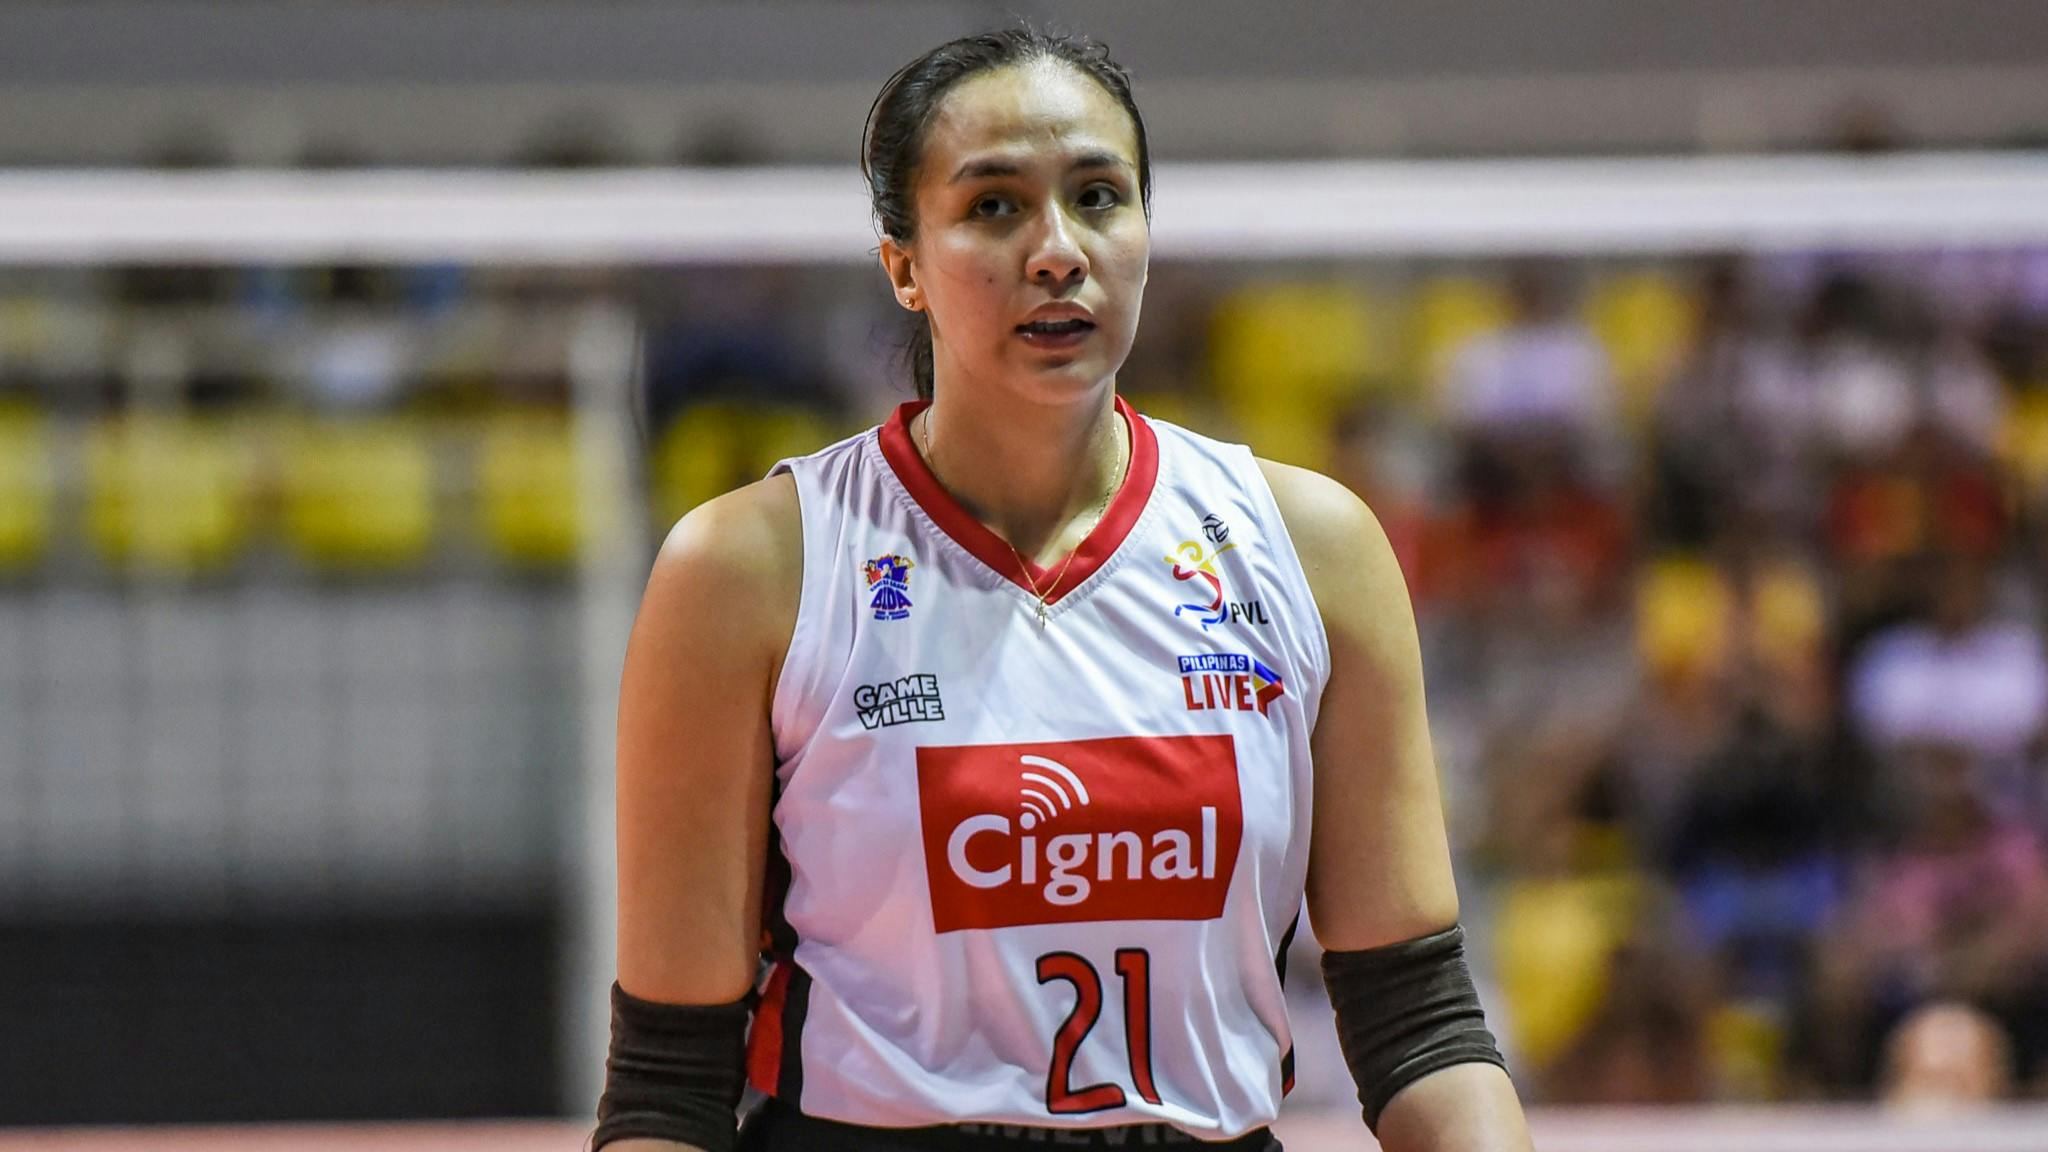 PVL: Jovelyn Gonzaga, Cignal play spoilers, ending their two-game slide at the expense of PLDT